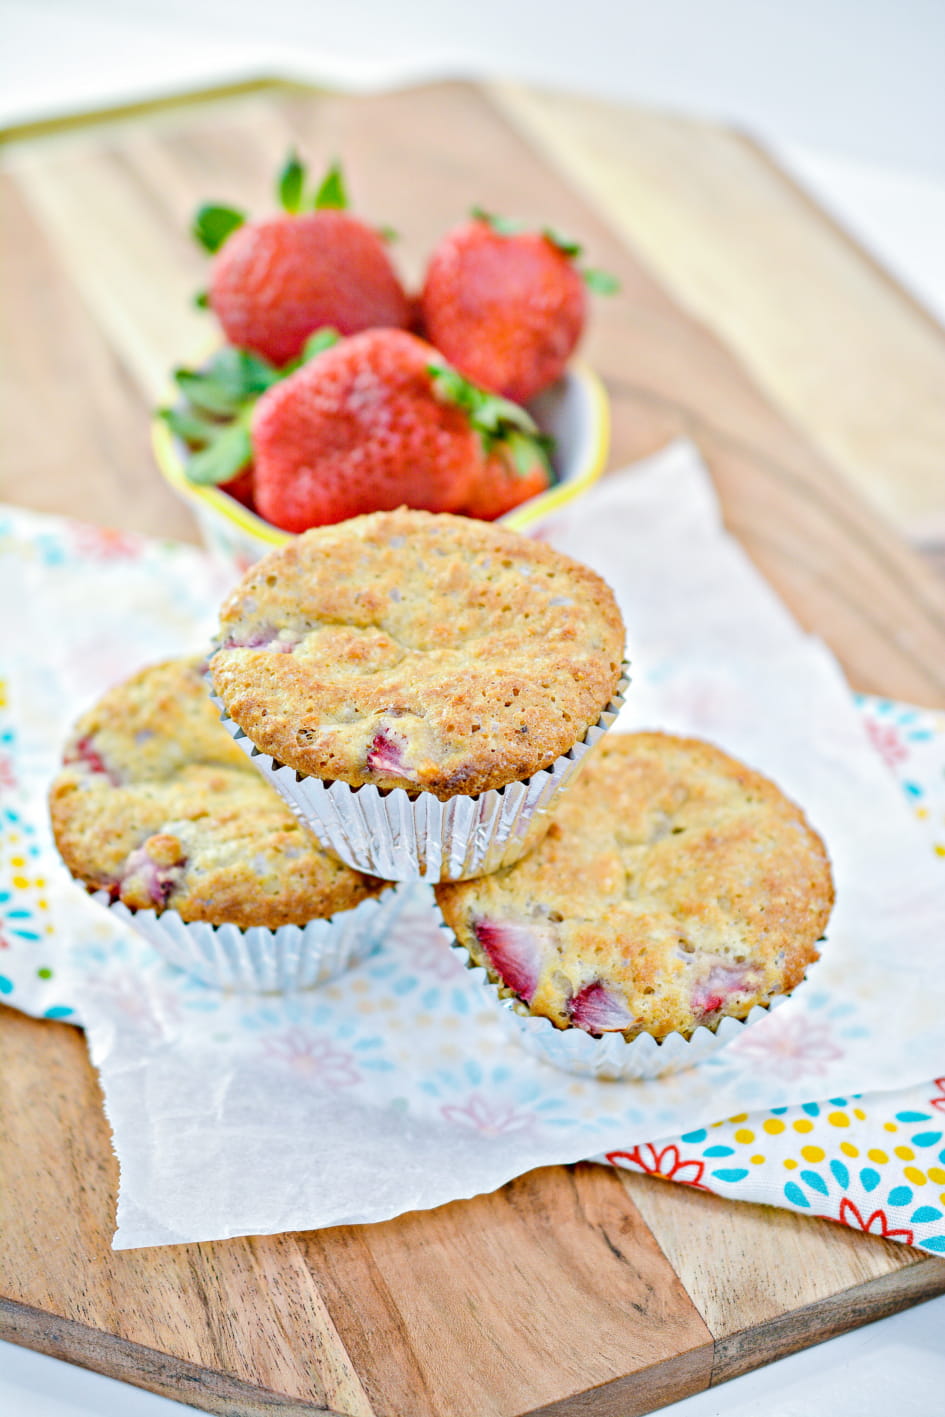 Decadent keto strawberry muffins out of the oven ready to serve.